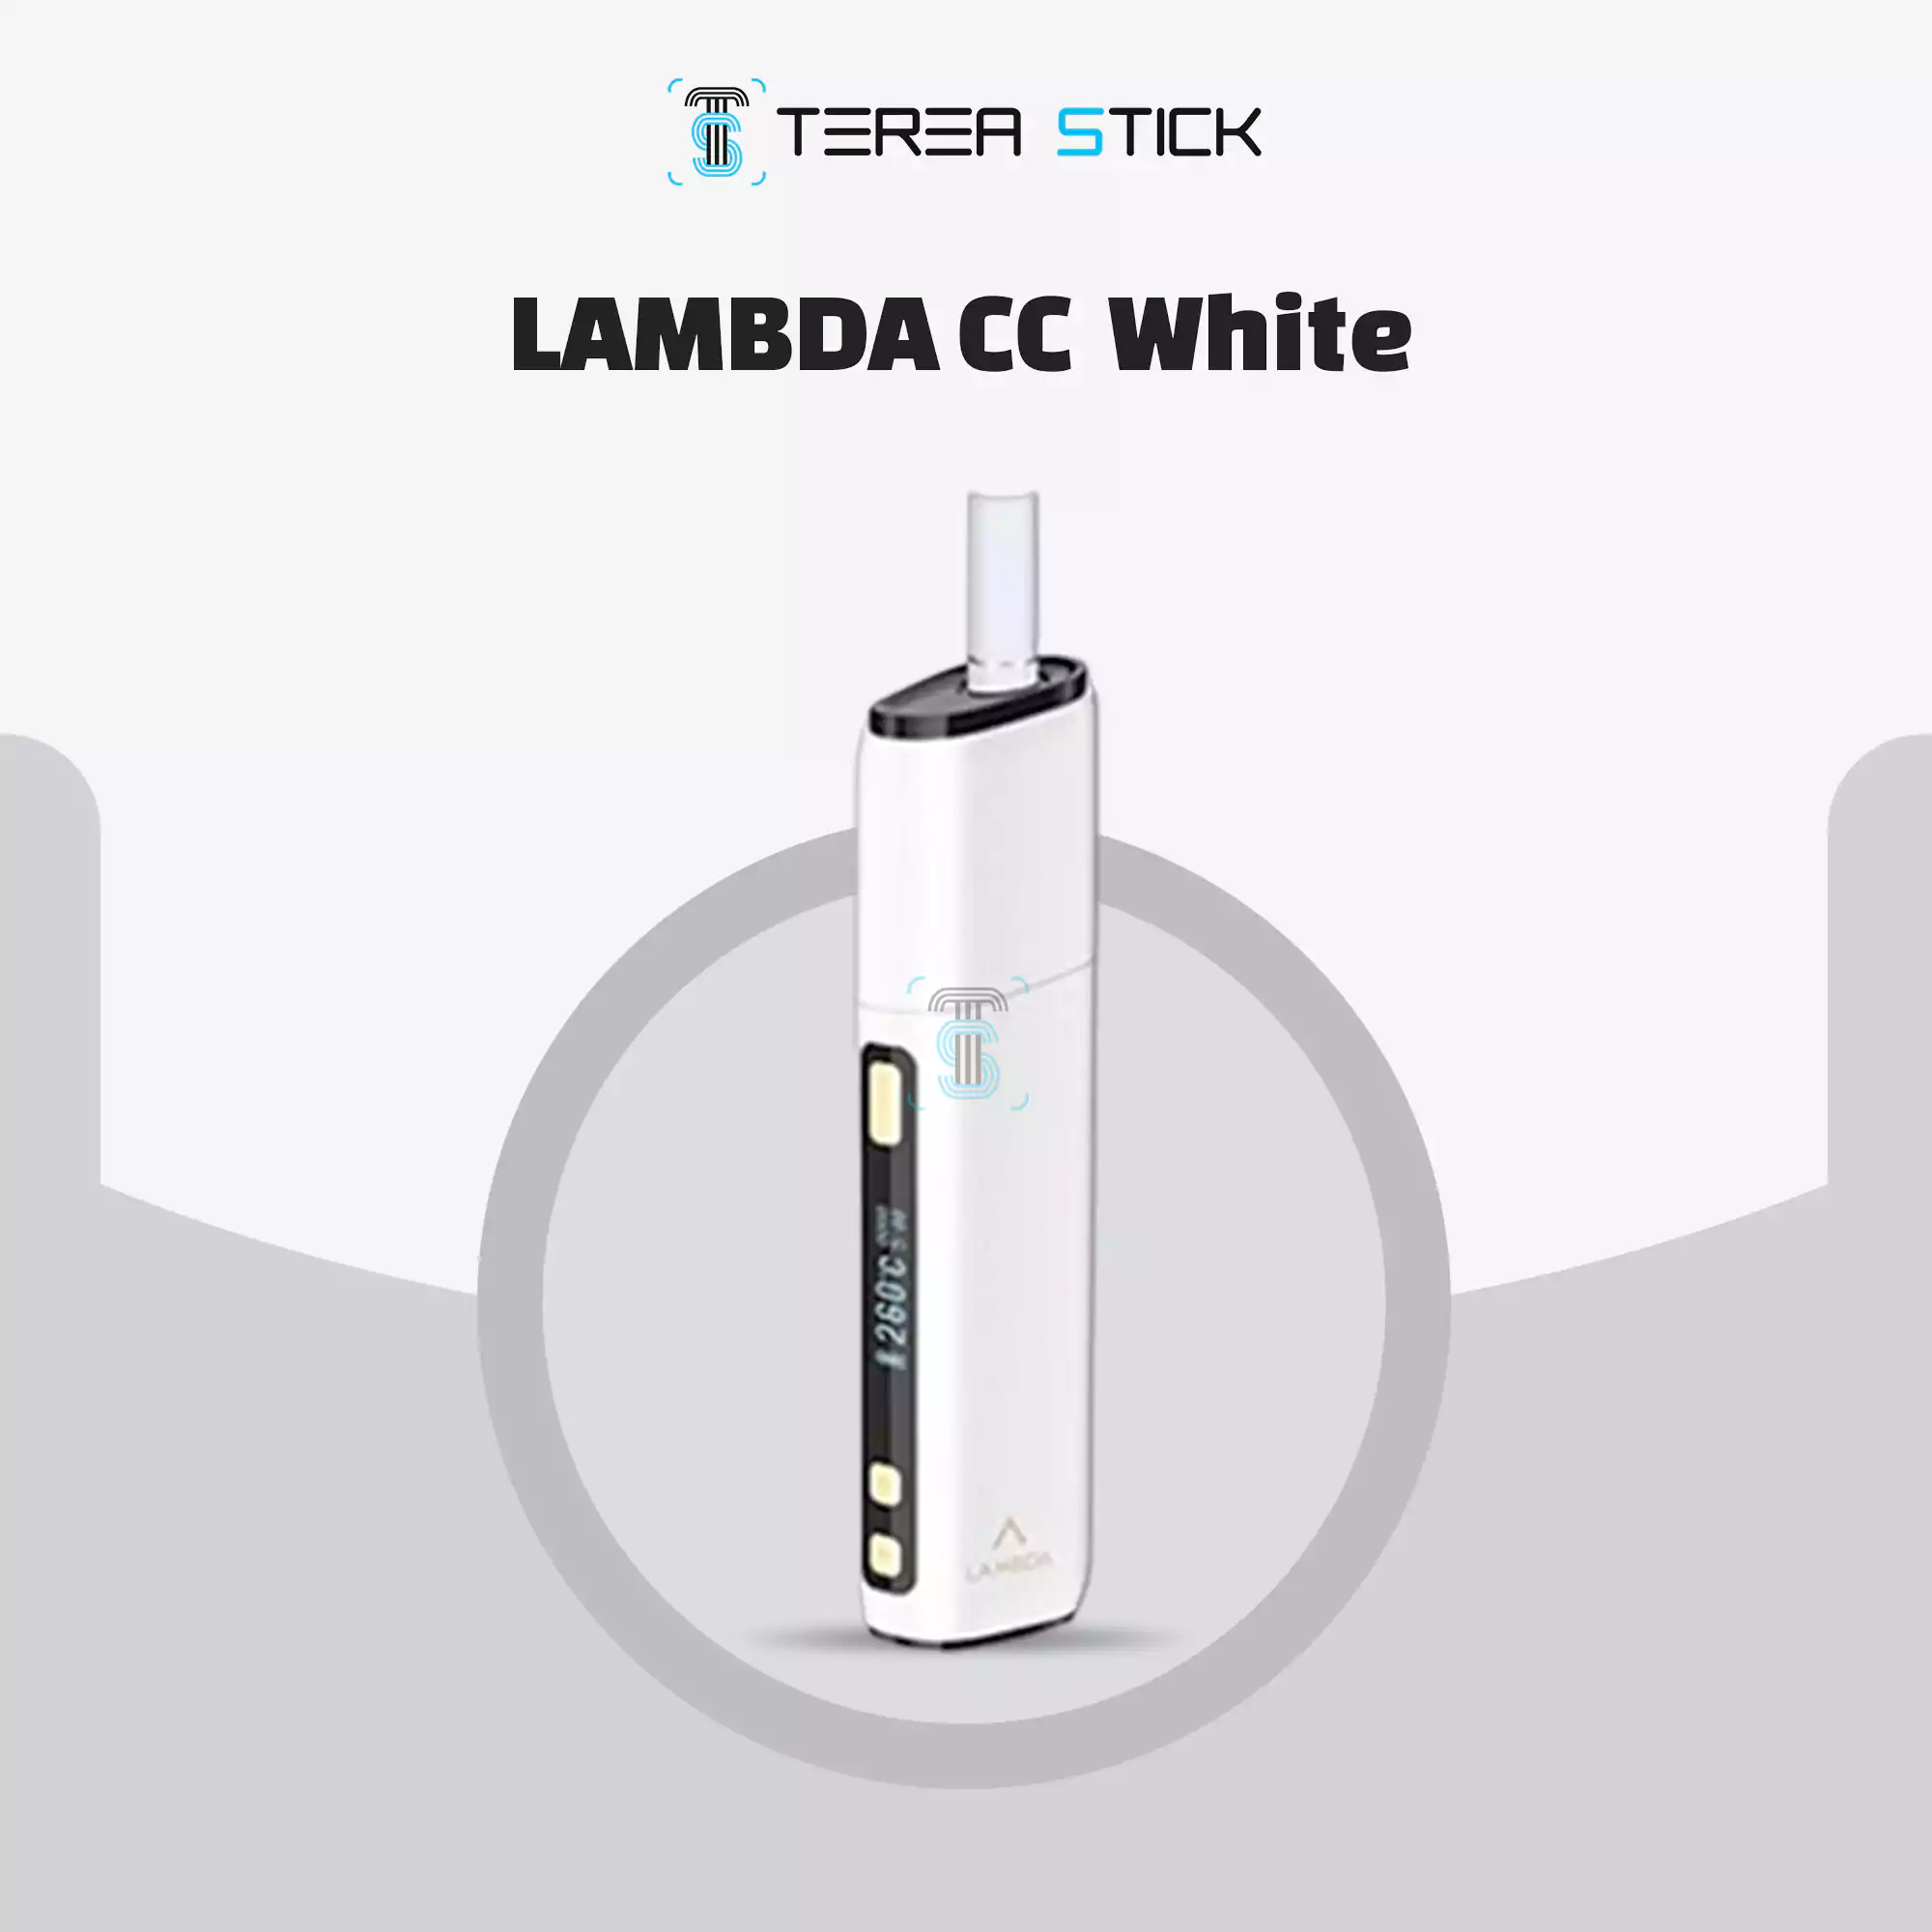 LAMBDA CC White For HEETS In UAE